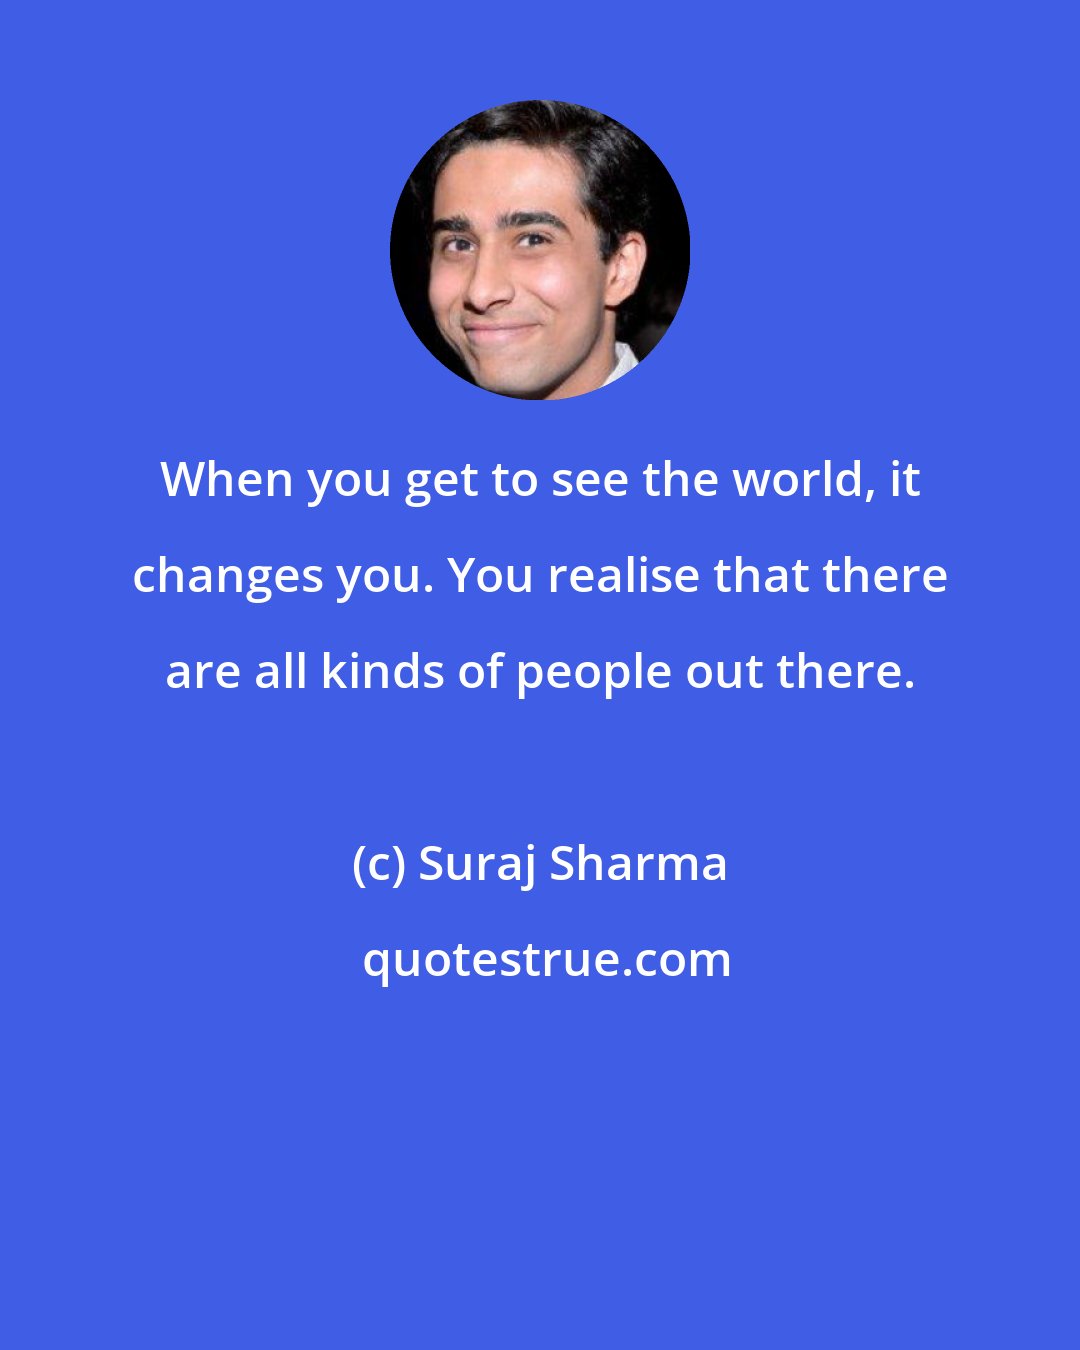 Suraj Sharma: When you get to see the world, it changes you. You realise that there are all kinds of people out there.